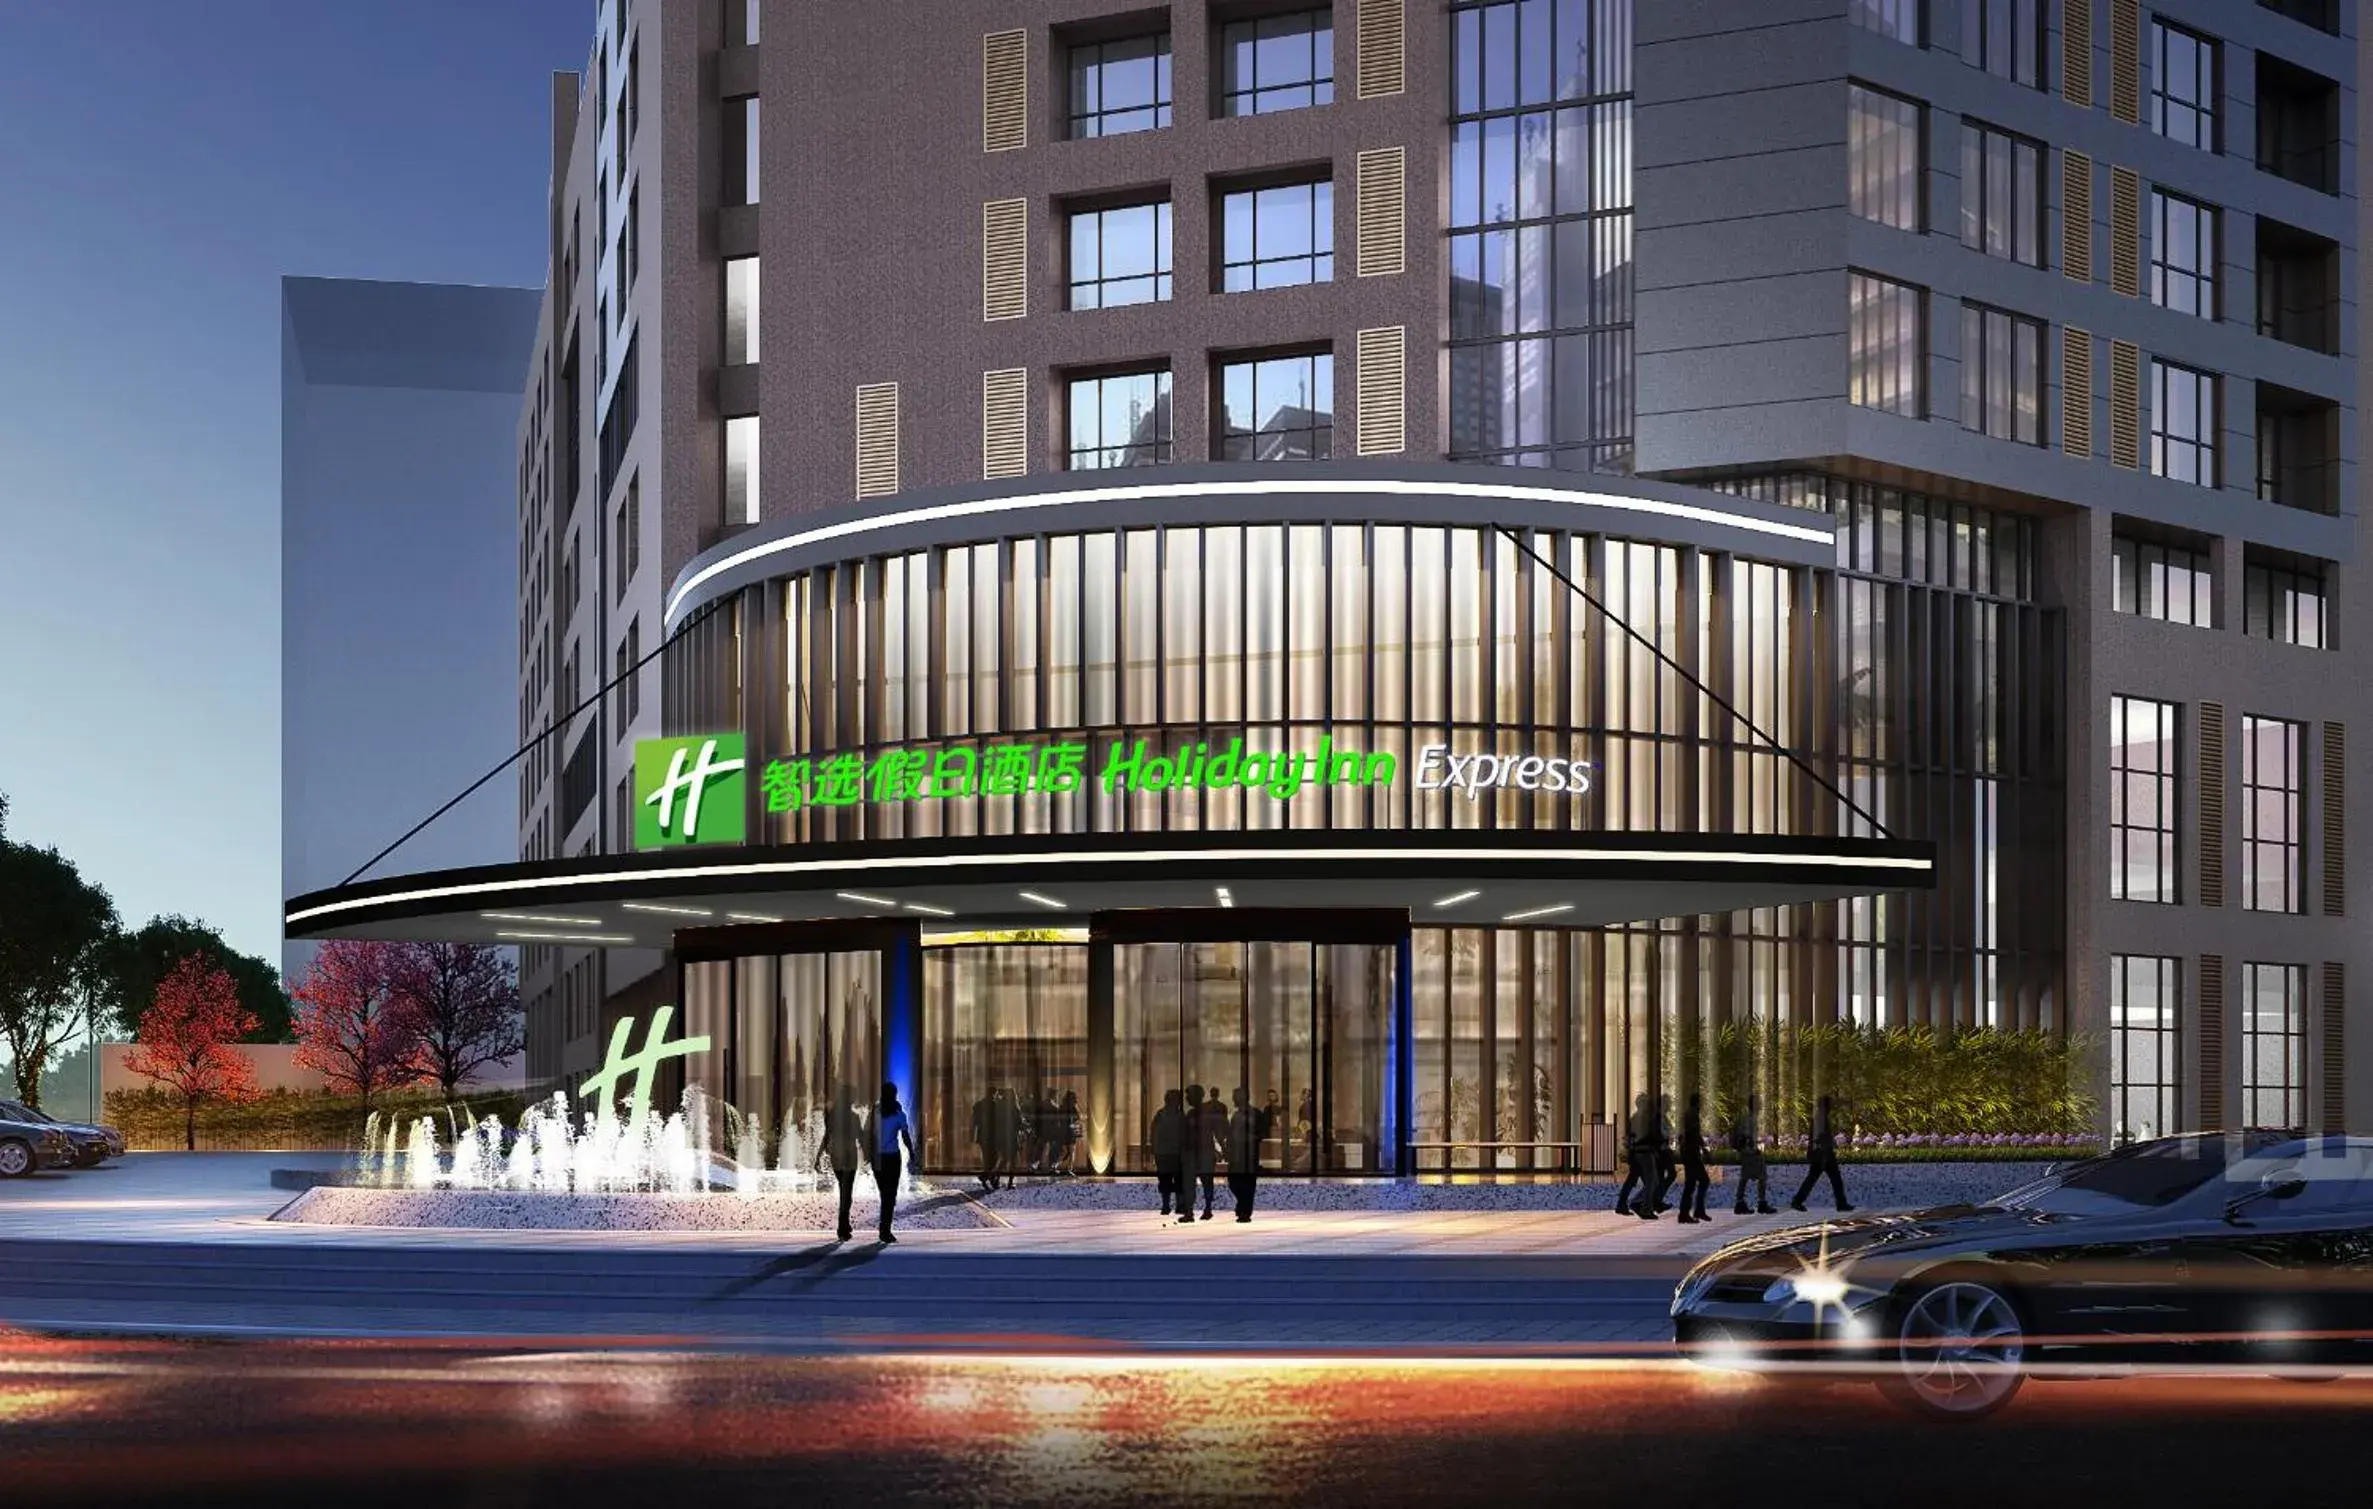 Property Building in Holiday Inn Express Tianjin Airport East, an IHG Hotel